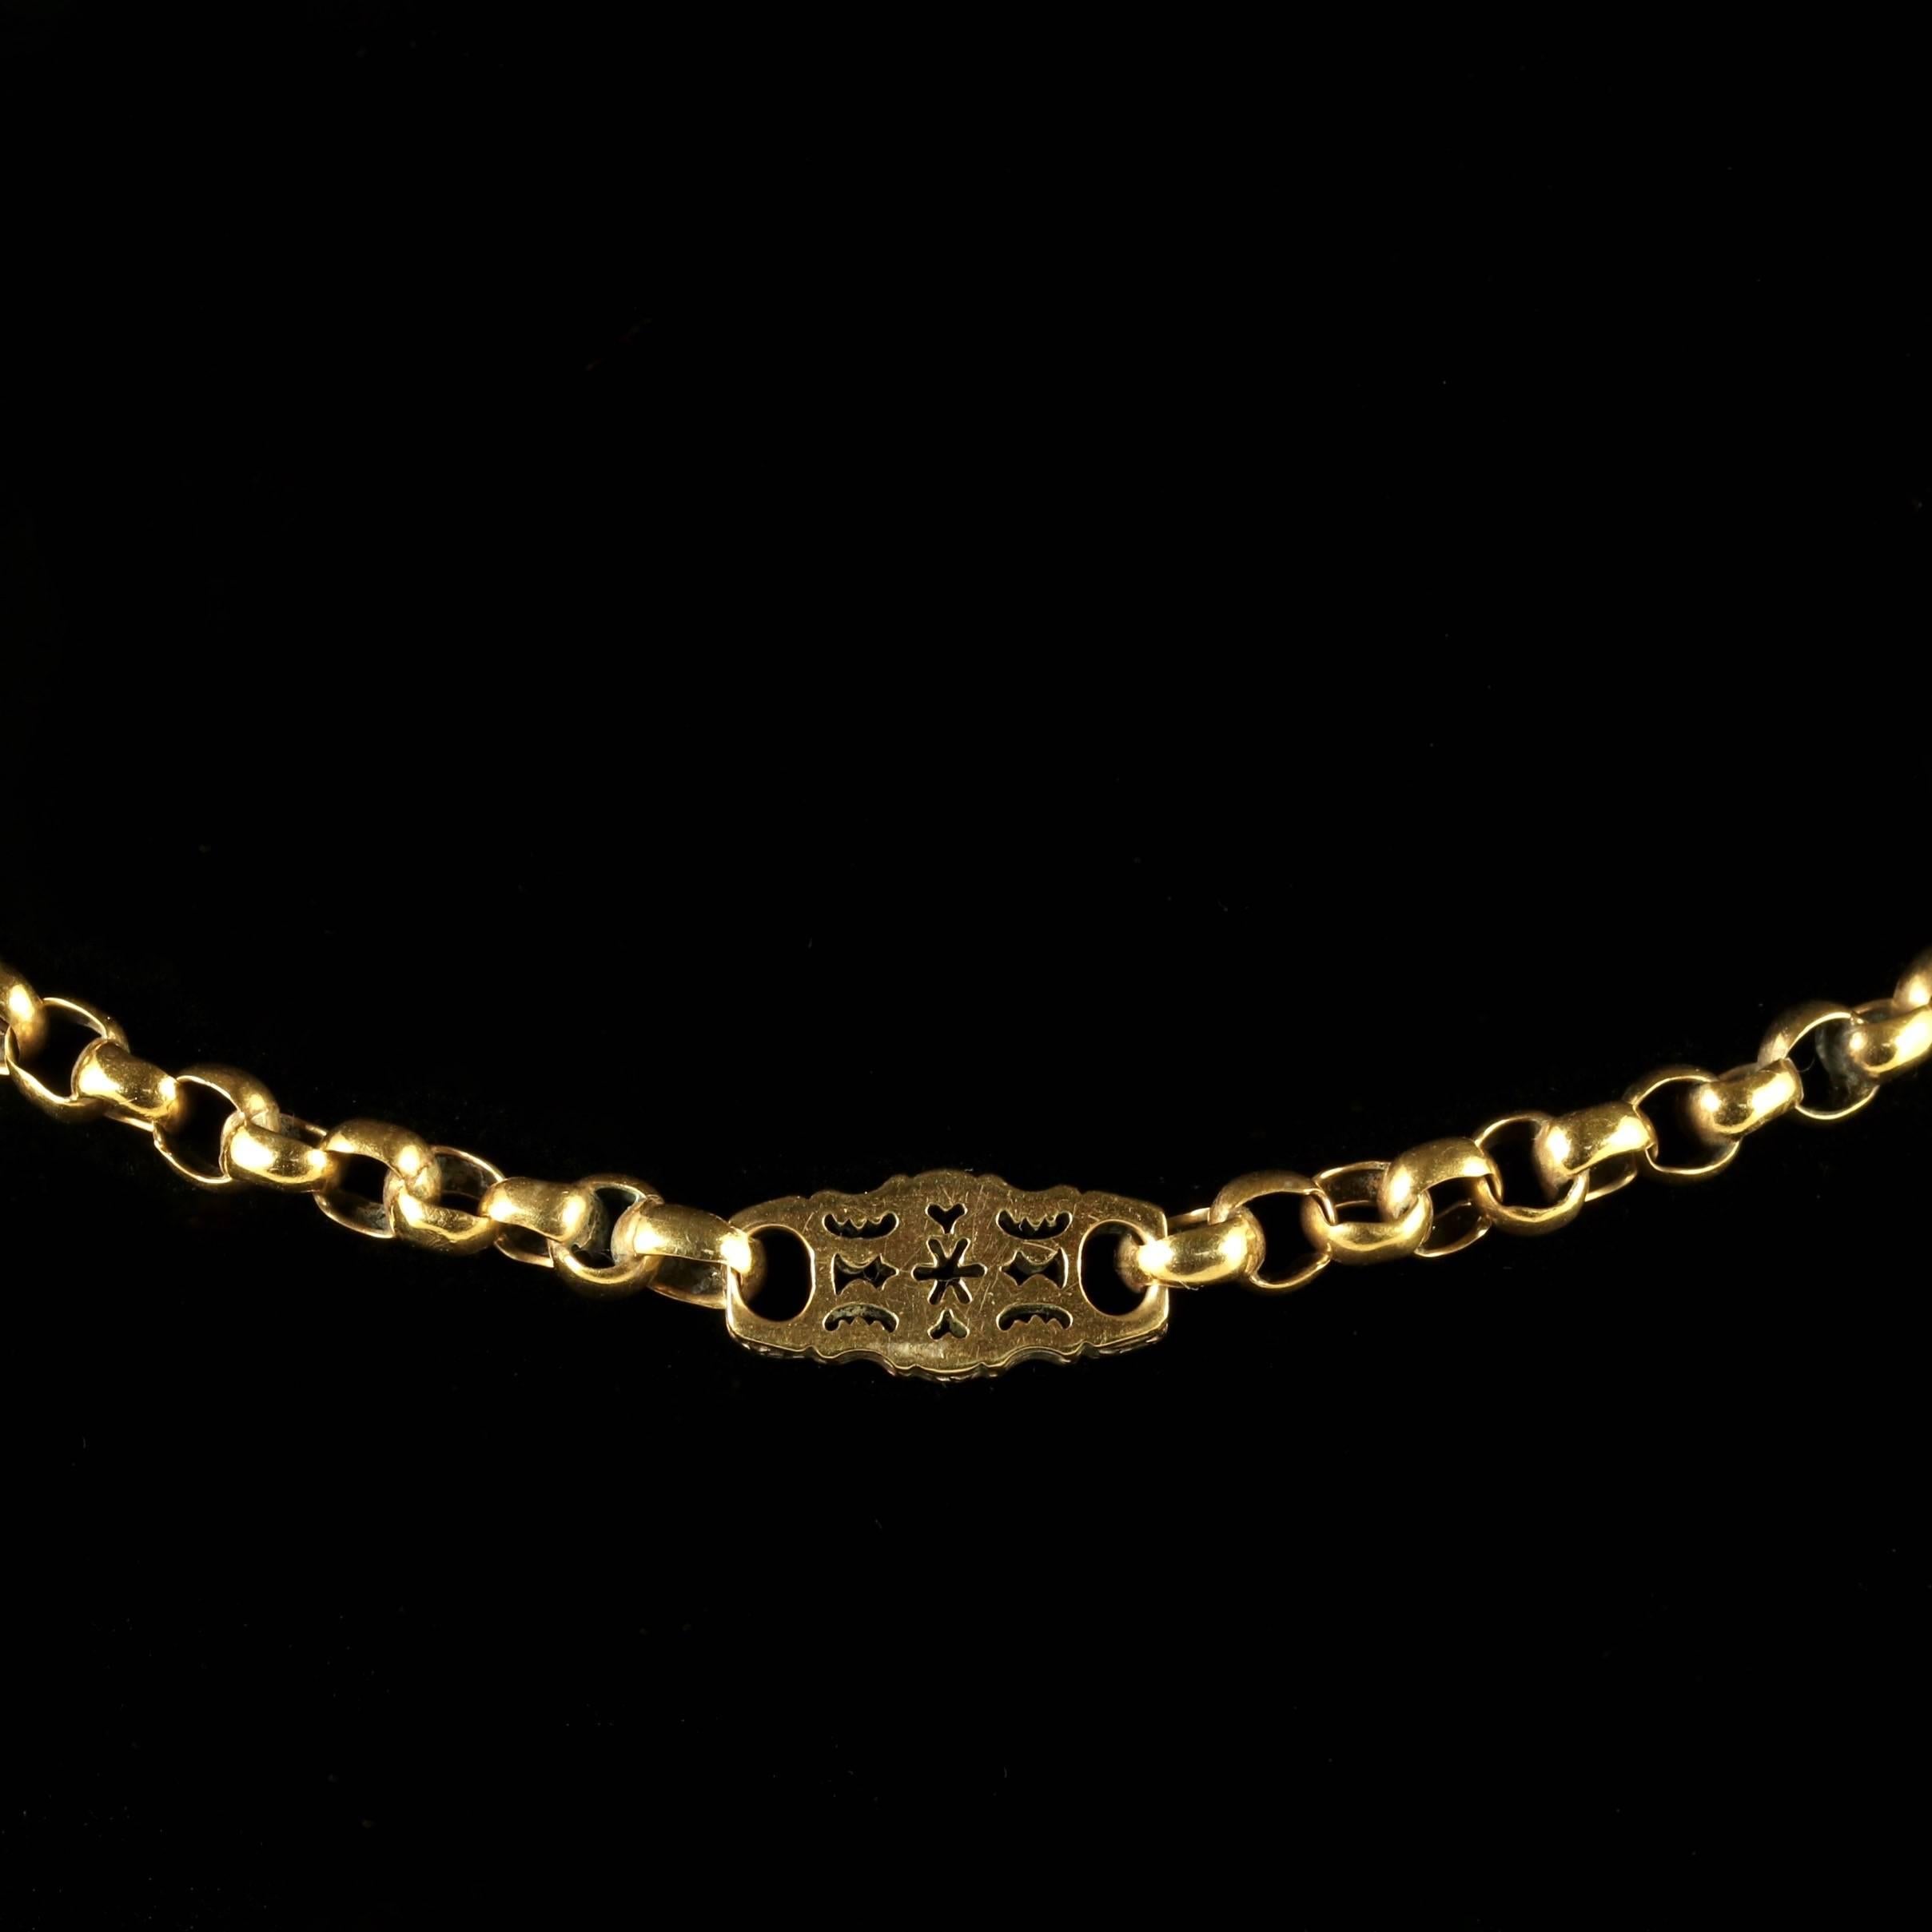 This fabulous antique Victorian Albert chain necklace is set in 18ct Gold on Silver, Circa 1880.

This is a heavy Albert chain that is superb in weight and design.

The chain is adorned with panels that follow around the necklace, showing fabulous